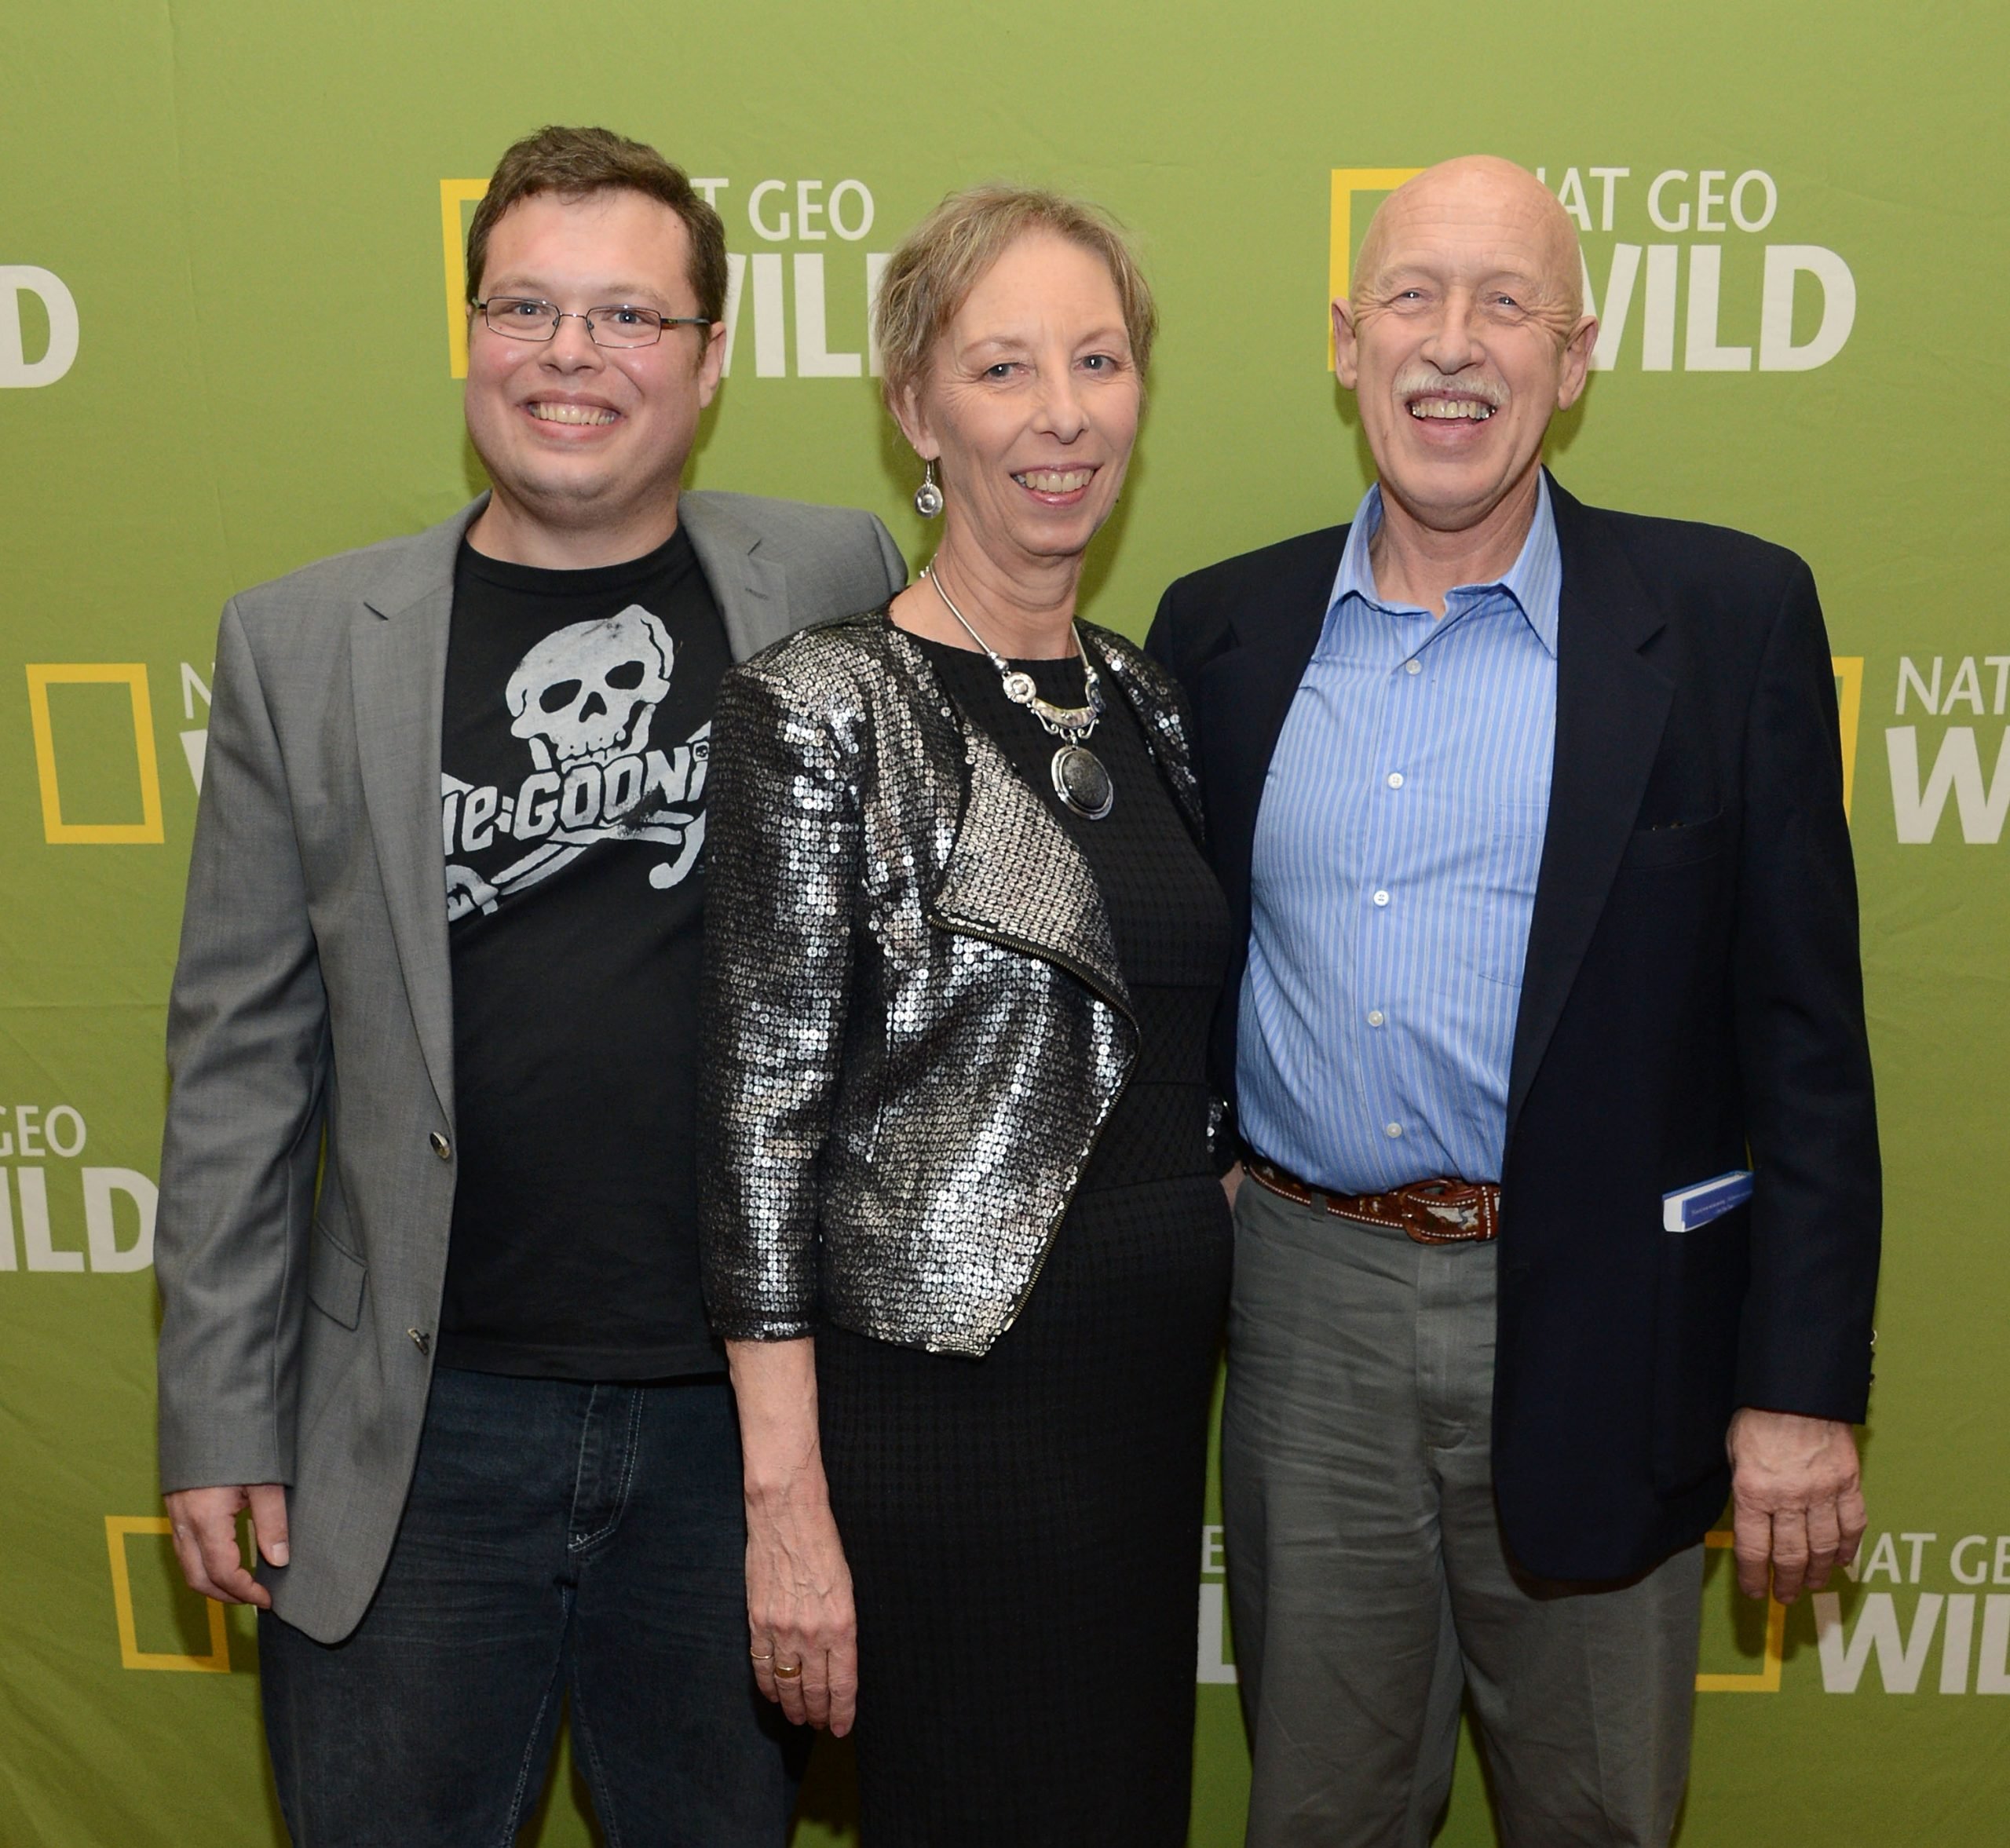 (left to right): Charles Pol, Diane Pol, and Dr. Jan Pol of 'The Incredible Dr. Pol'